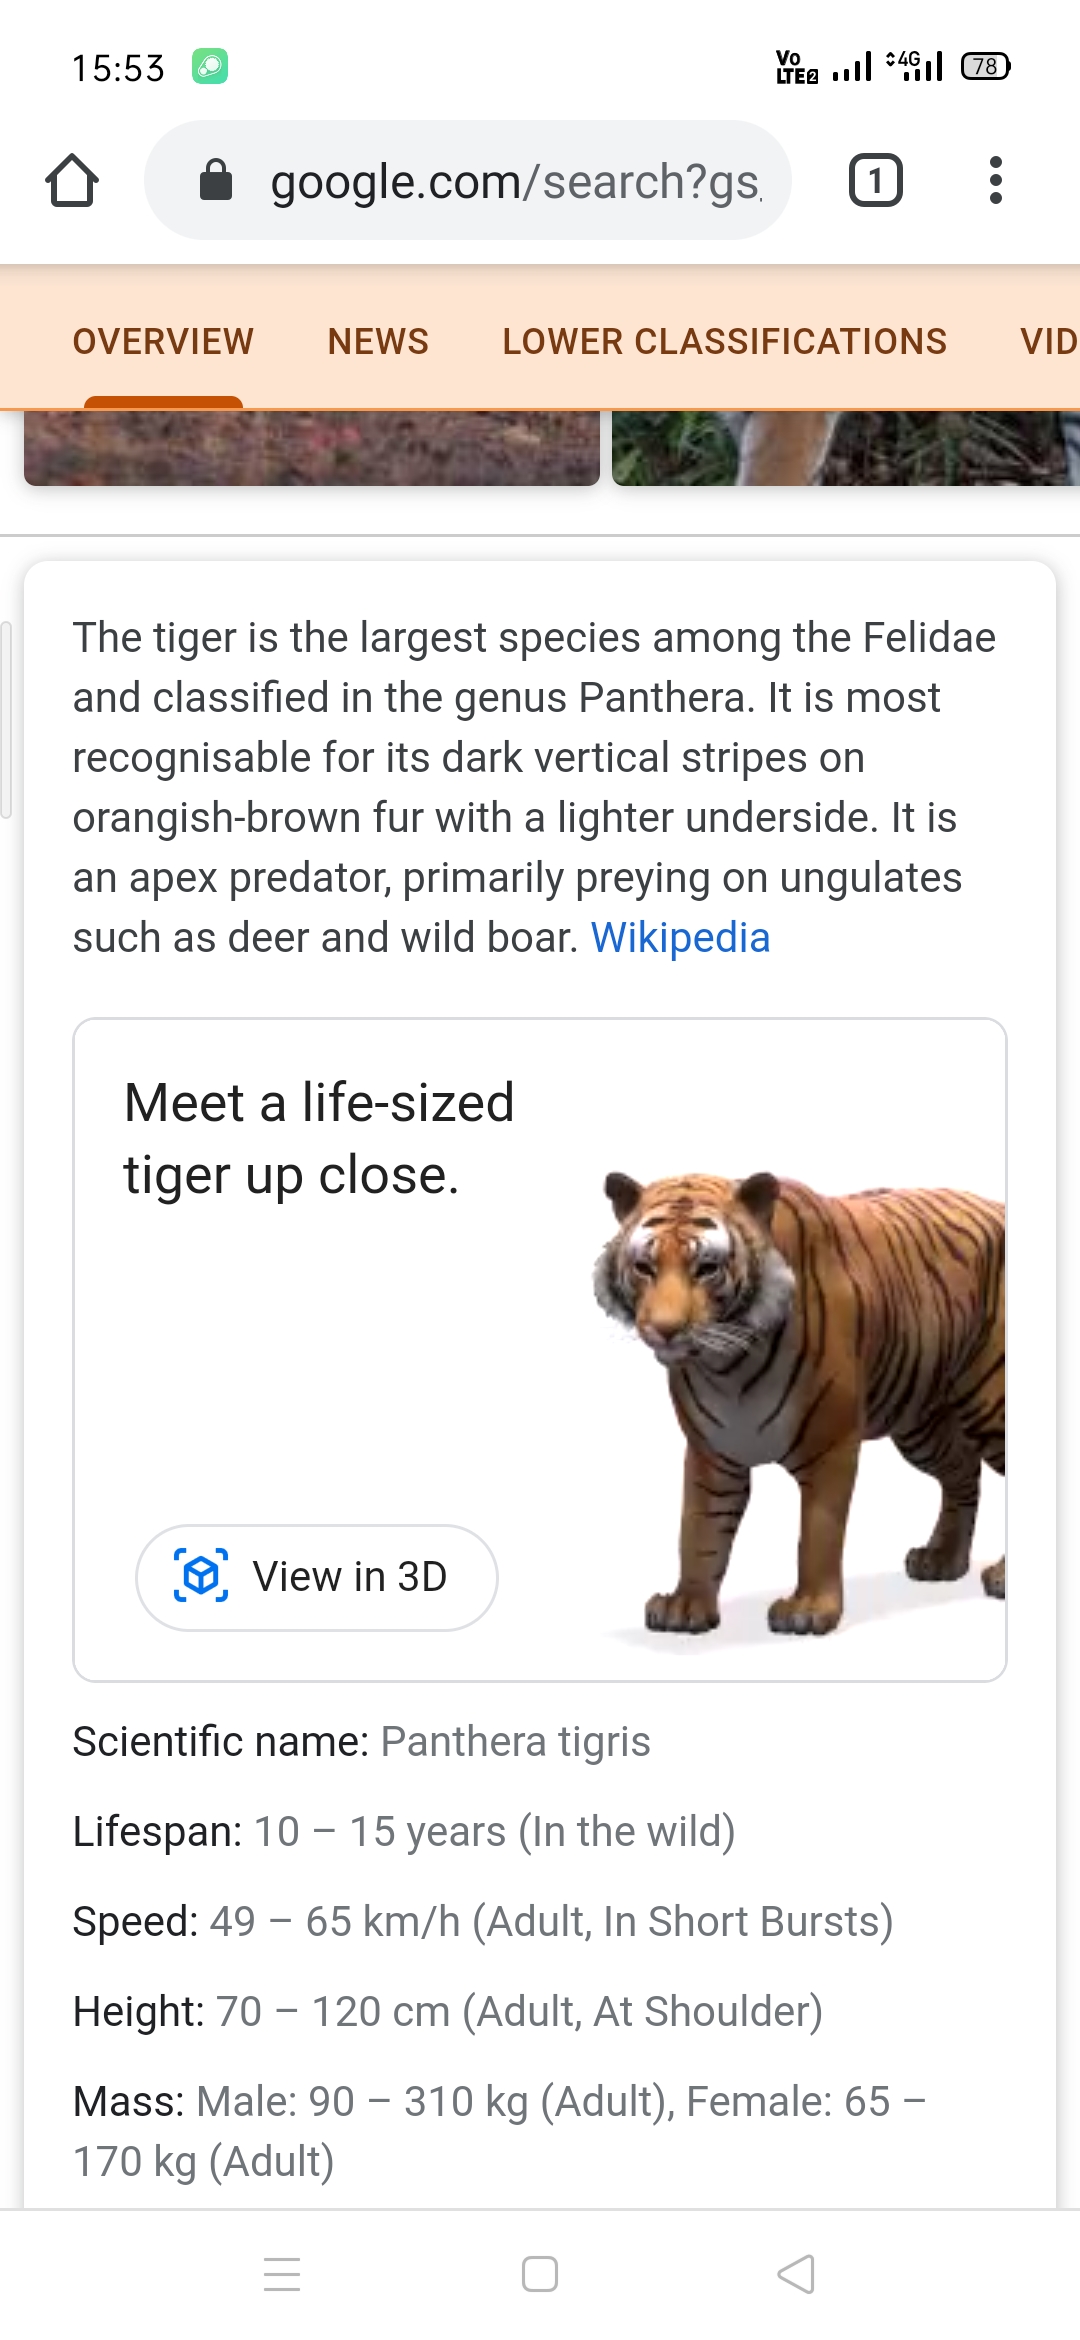 Here's how to look at life-size animals in AR through Google